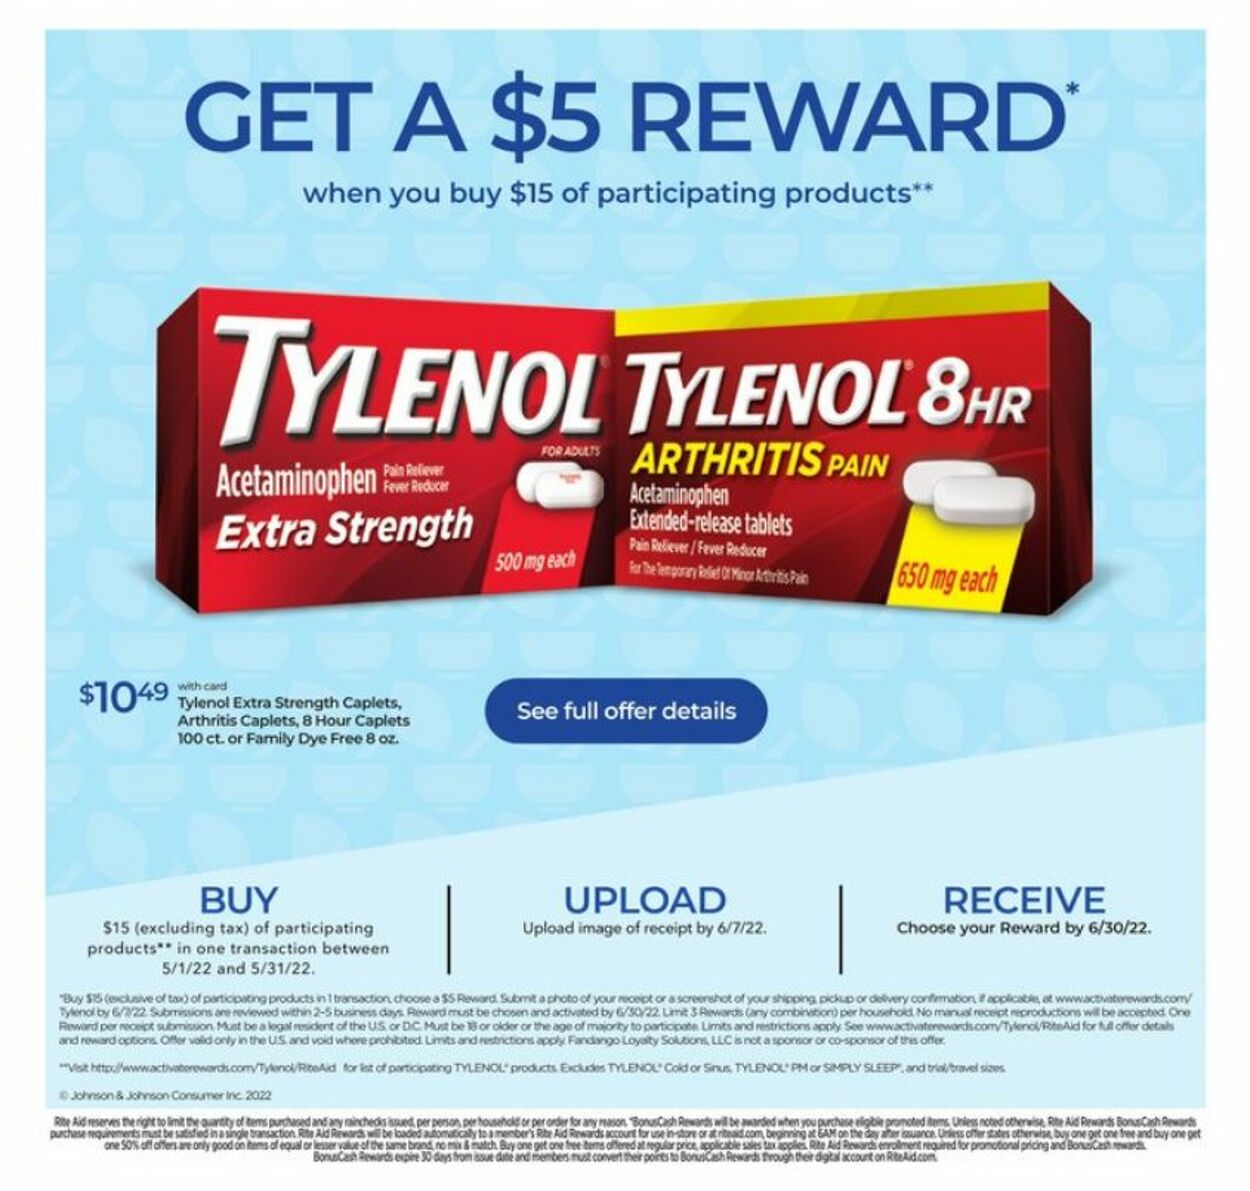 Weekly ad Rite Aid 05/01/2022 - 05/07/2022